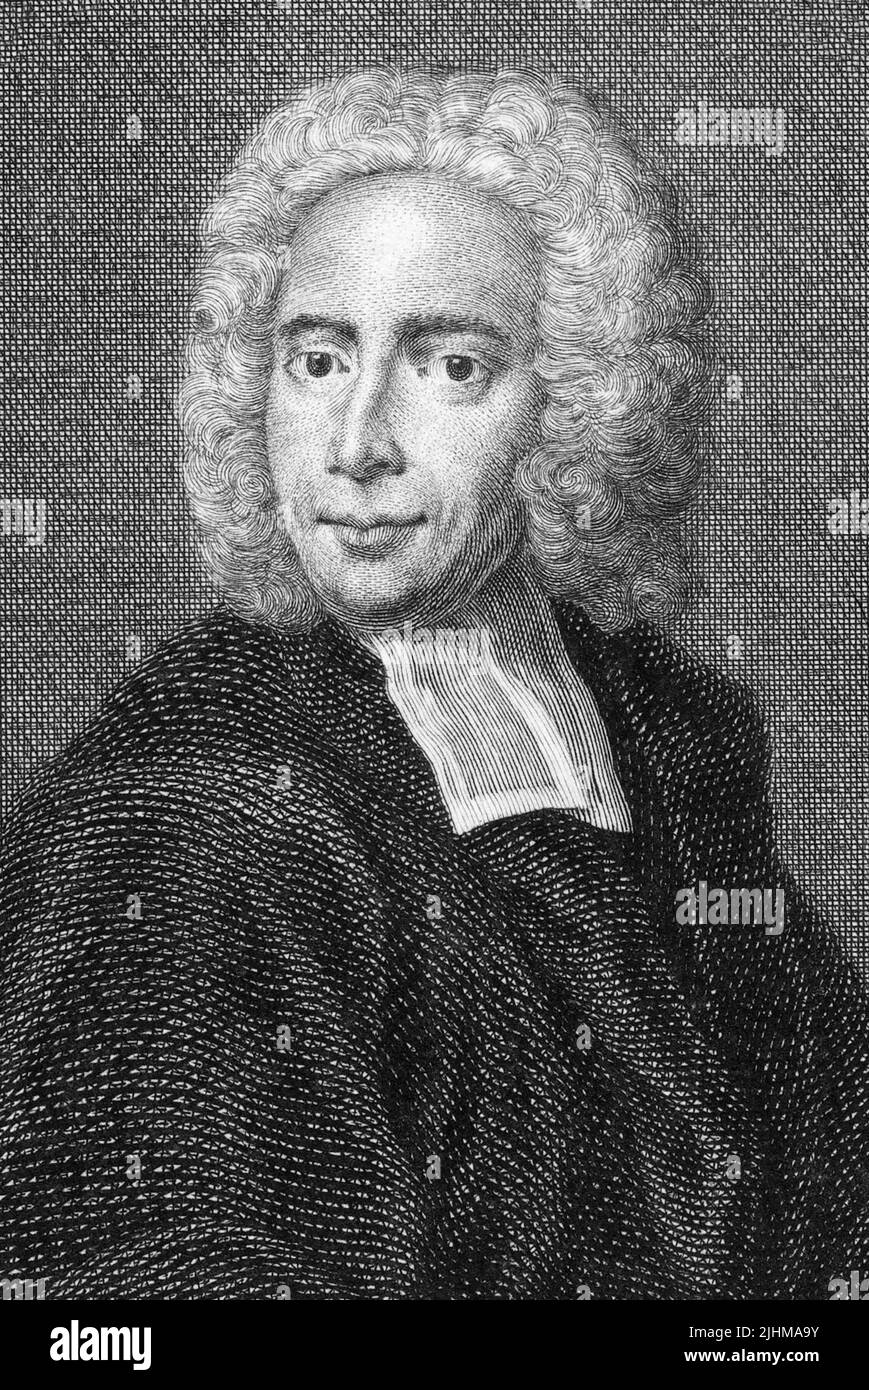 Isaac Watts (1674–1748), known as The Father of English Hymnody,  was a hymn writer, Congregational minister, theologian, and logician. He was prolific and popular as a hymn writer and is credited with some 750 hymns, including 'When I Survey the Wondrous Cross', 'Joy to the World', and 'O God, Our Help in Ages Past'. Stock Photo